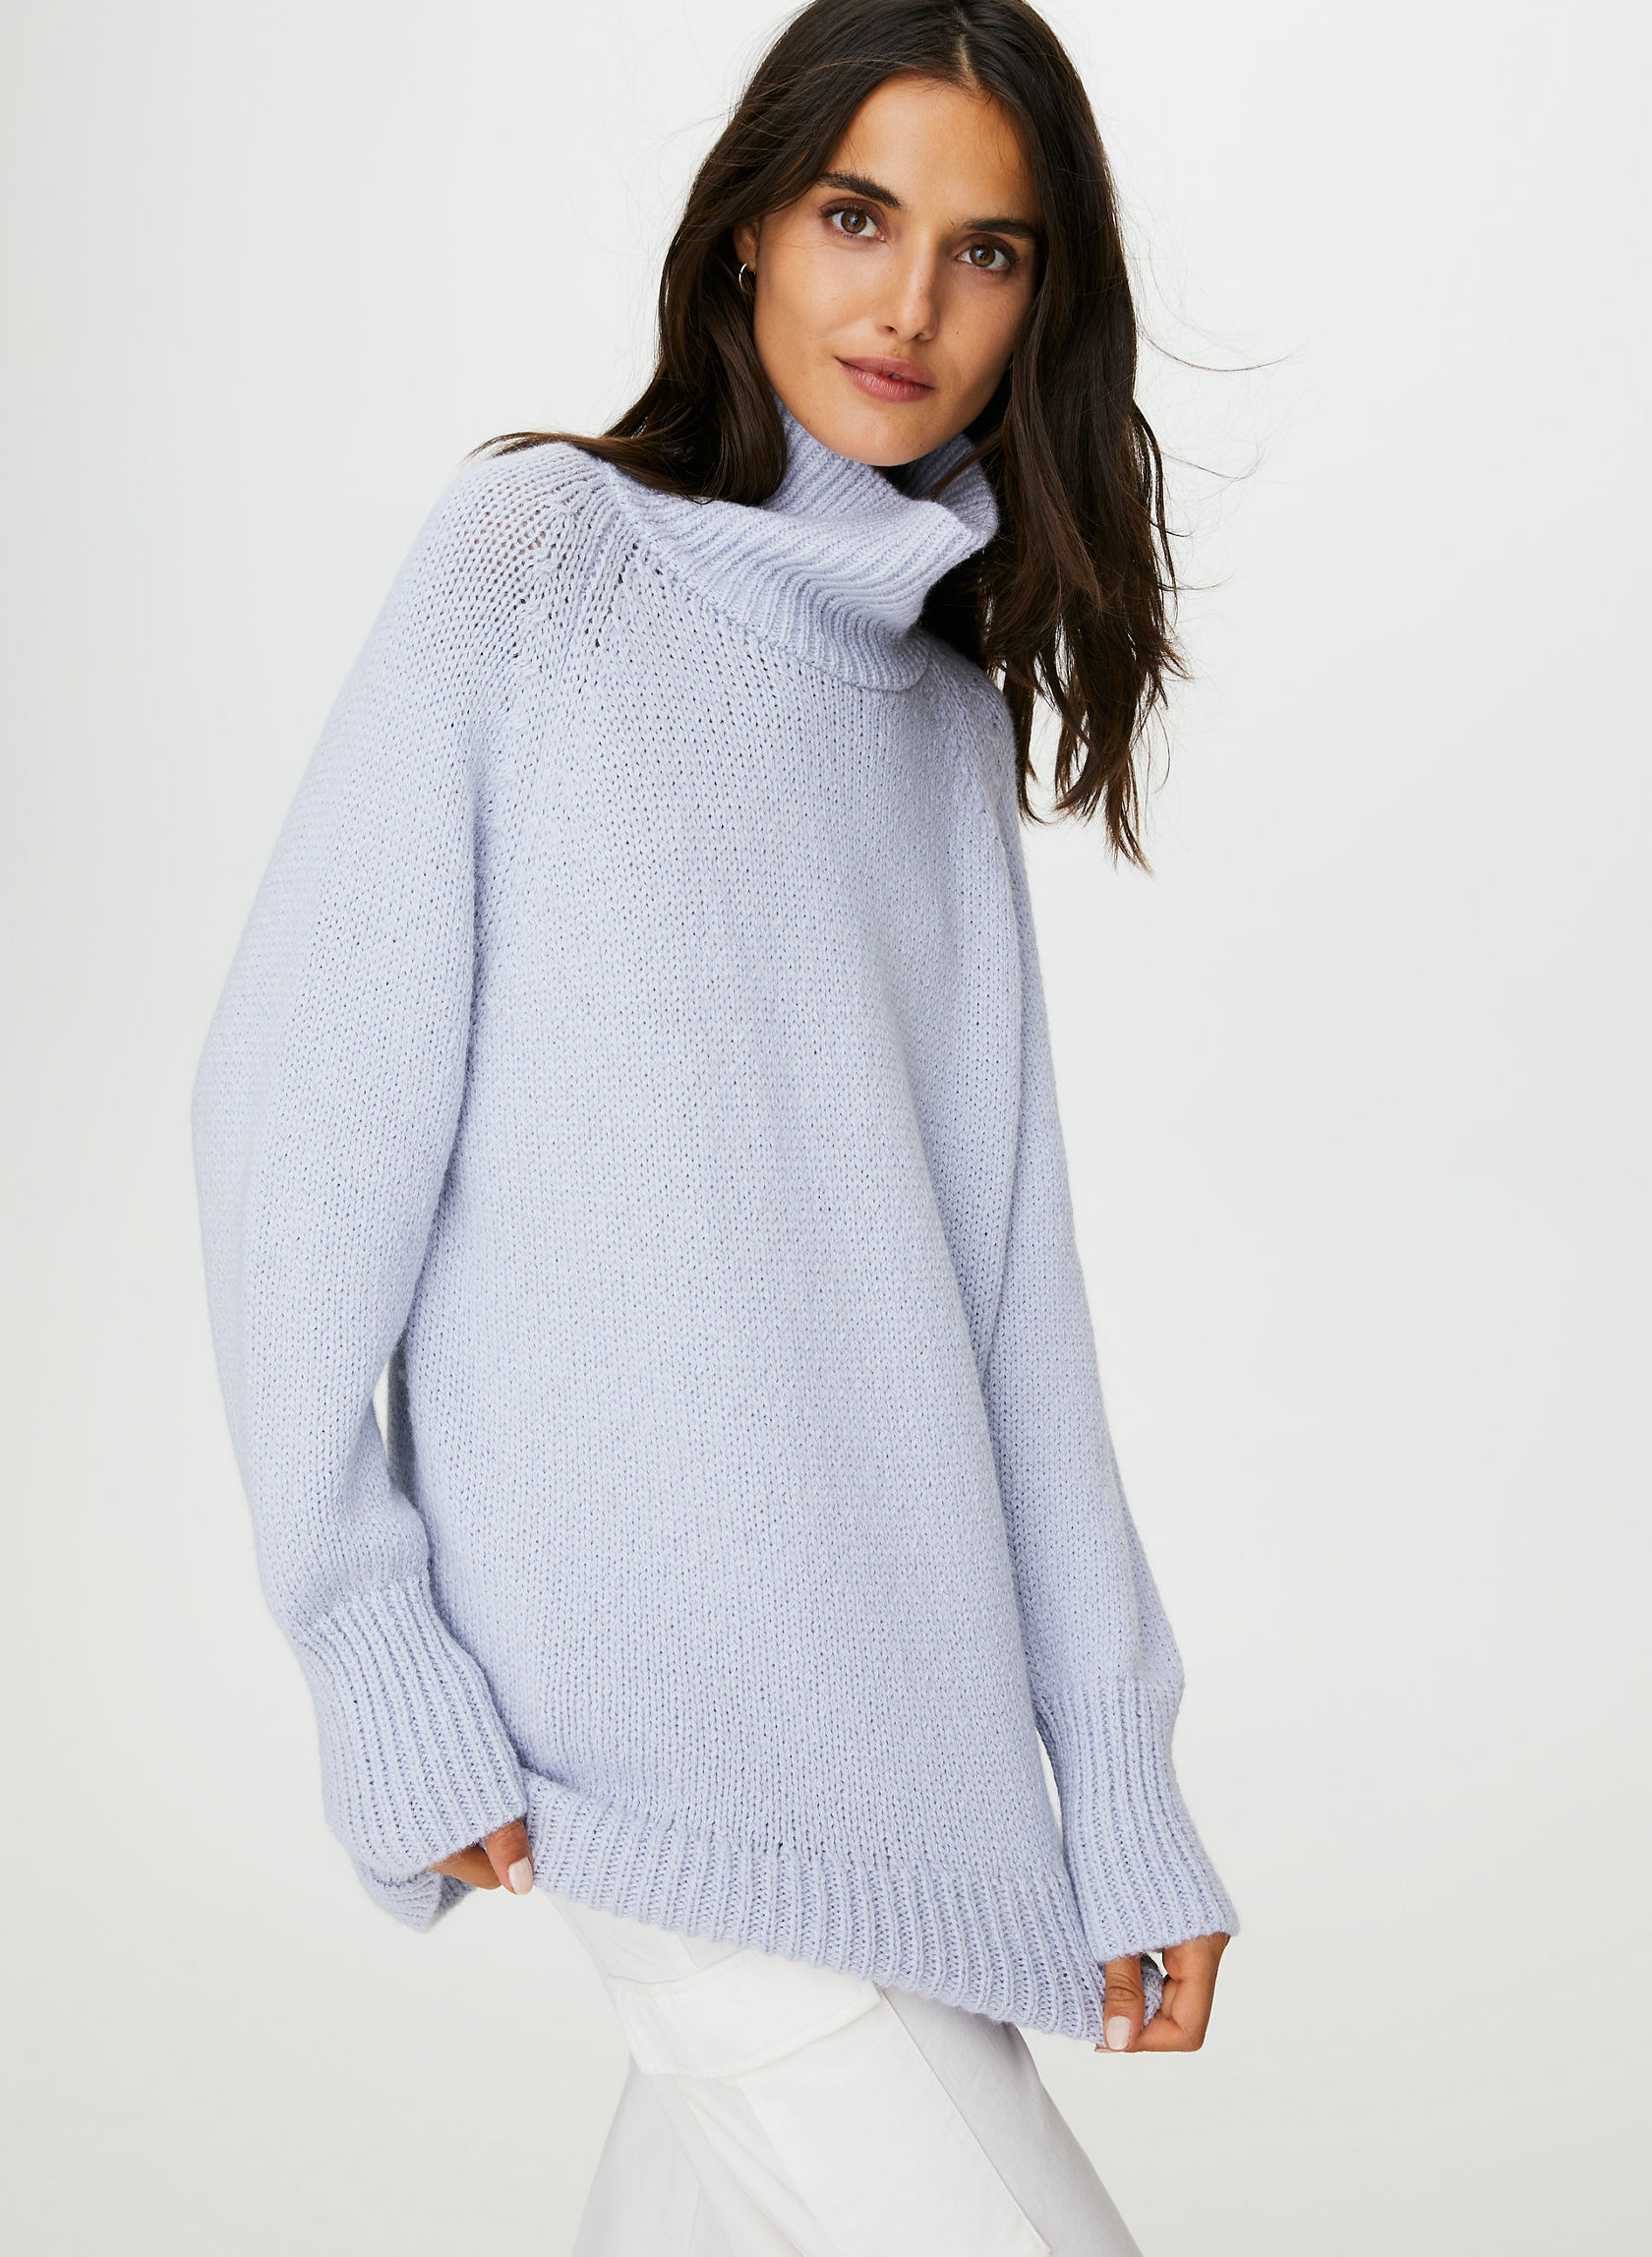 The Group by Babaton DAY OFF TURTLENECK SWEATER | Aritzia INTL